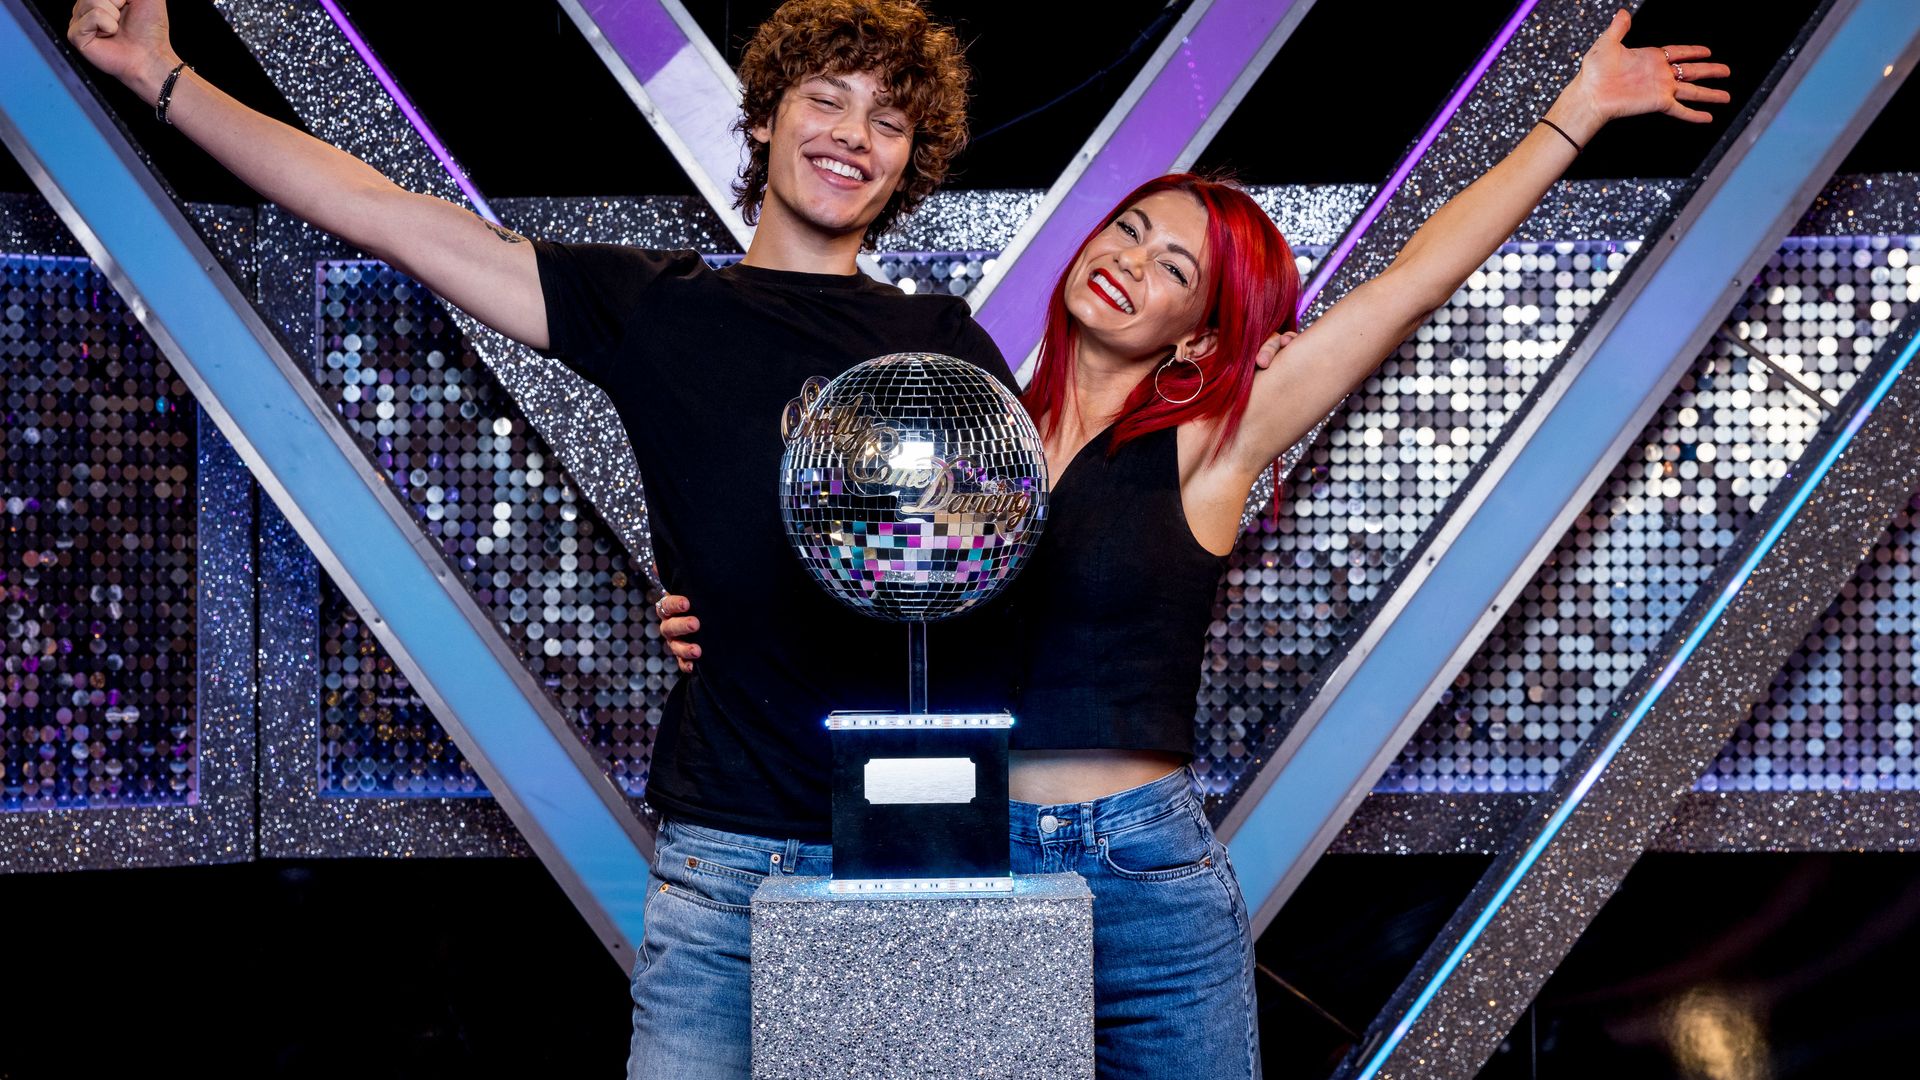 Bobby Brazier and Dianne Buswell lift the Glitterball trophy